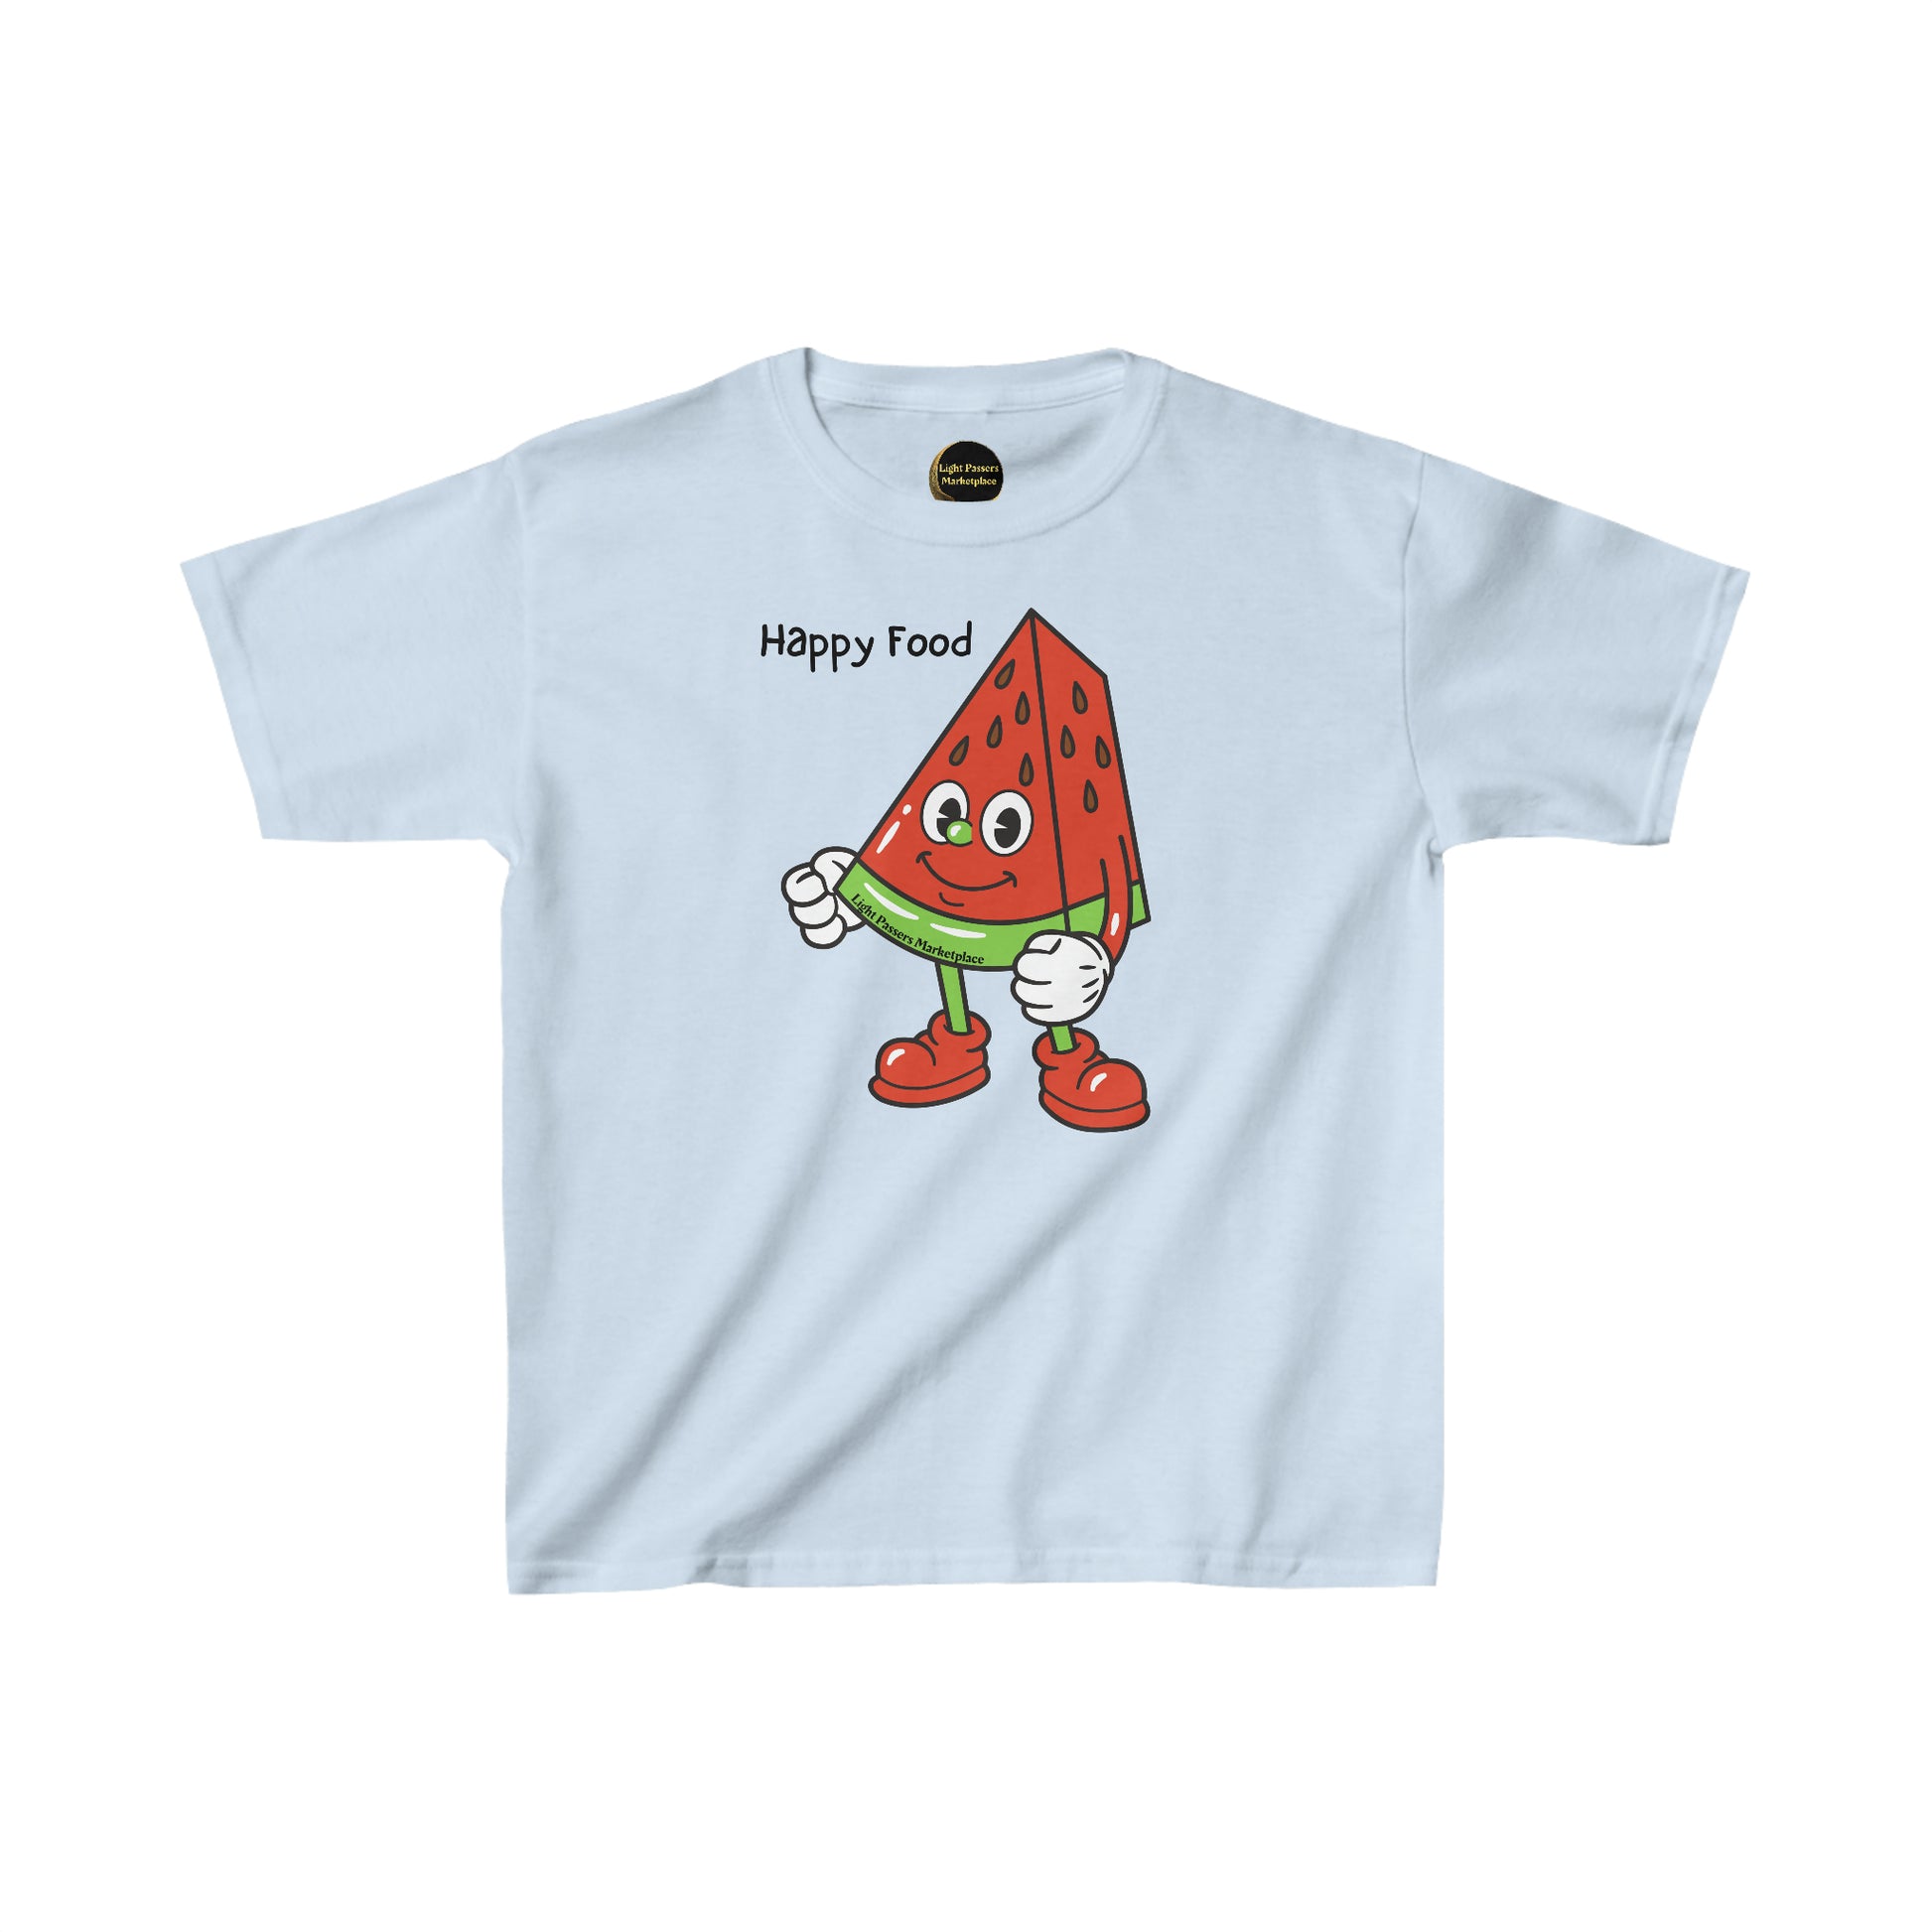 A youth t-shirt featuring a cartoon watermelon character on a white background. Made of 100% cotton with twill tape shoulders for durability and ribbed collar for curl resistance. Ethically sourced and Oeko-Tex certified.